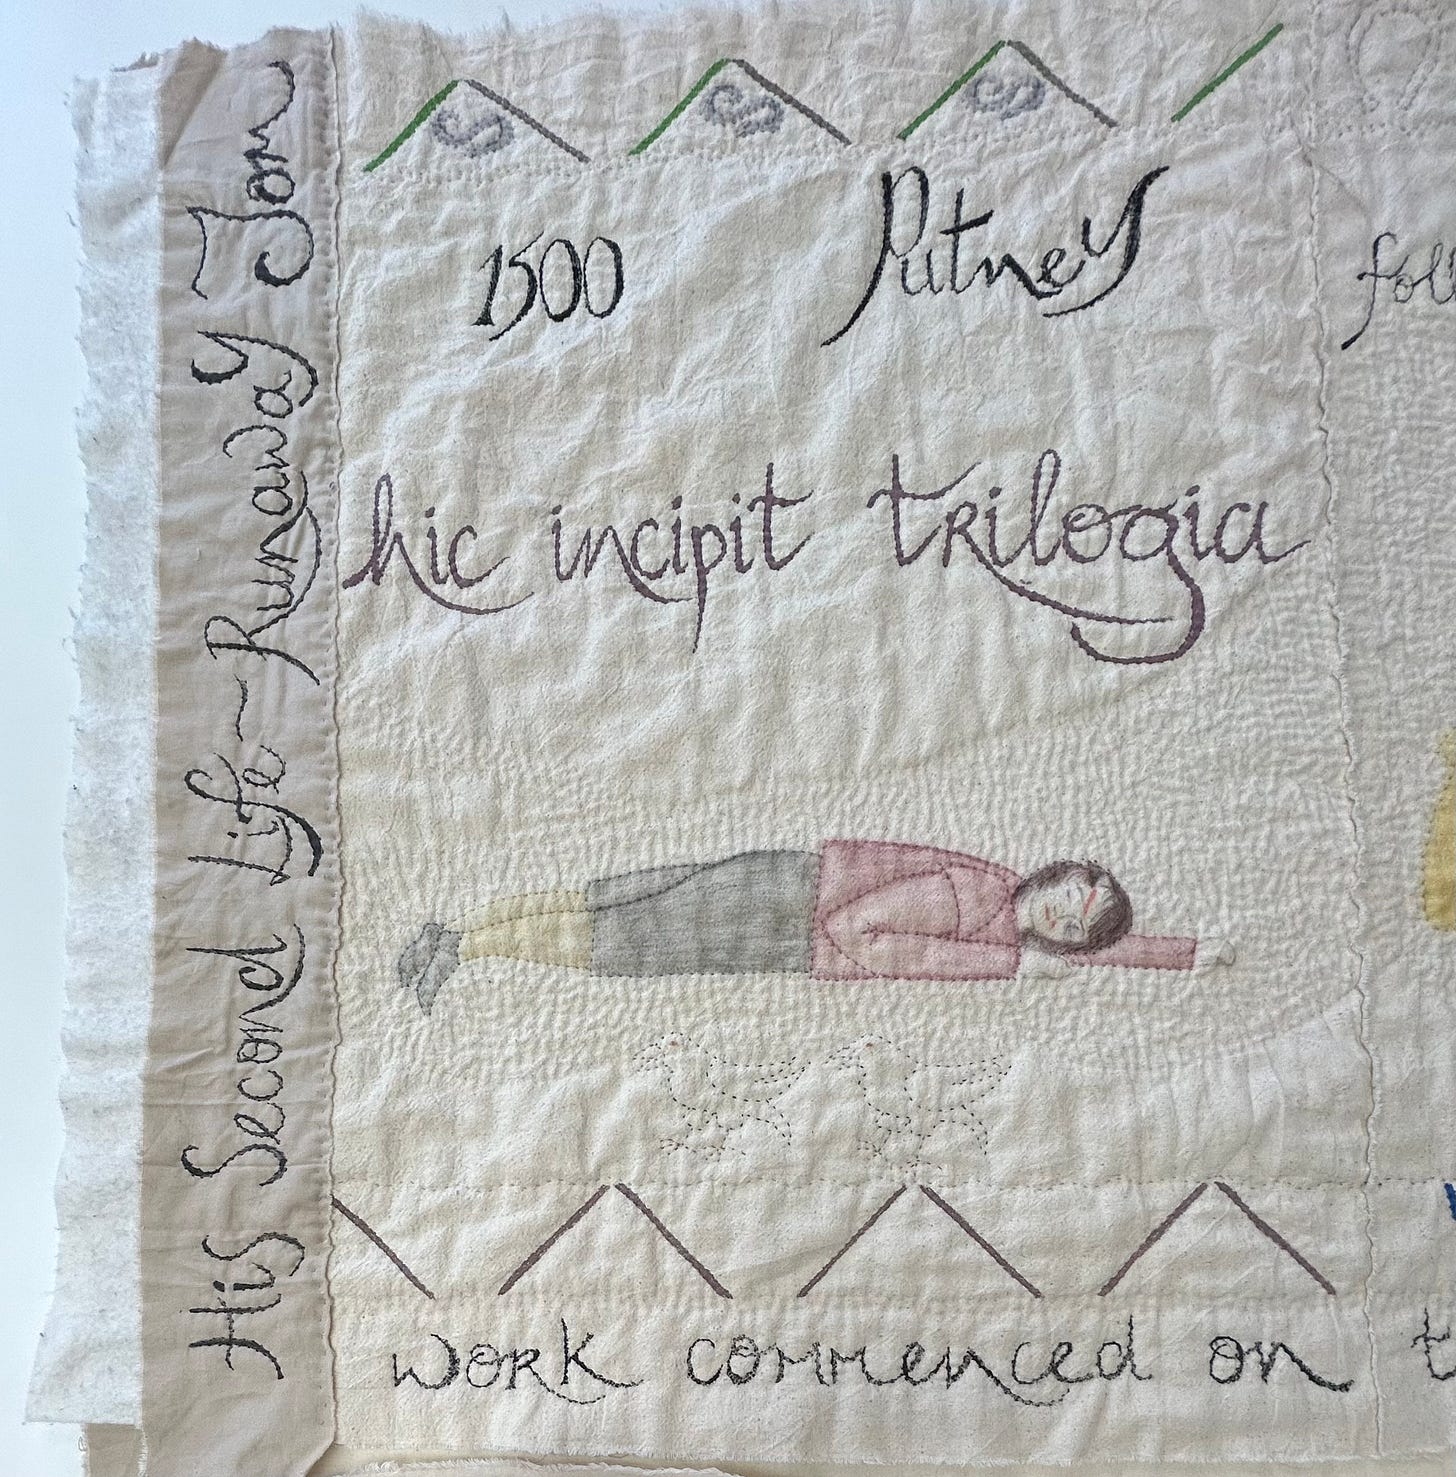 Quilted piece depicting a boy lying on the ground. Stitched in is text reading “His Second Life- Runaway Tom”; “1500 Putney”, and “hic incipient trilogia”